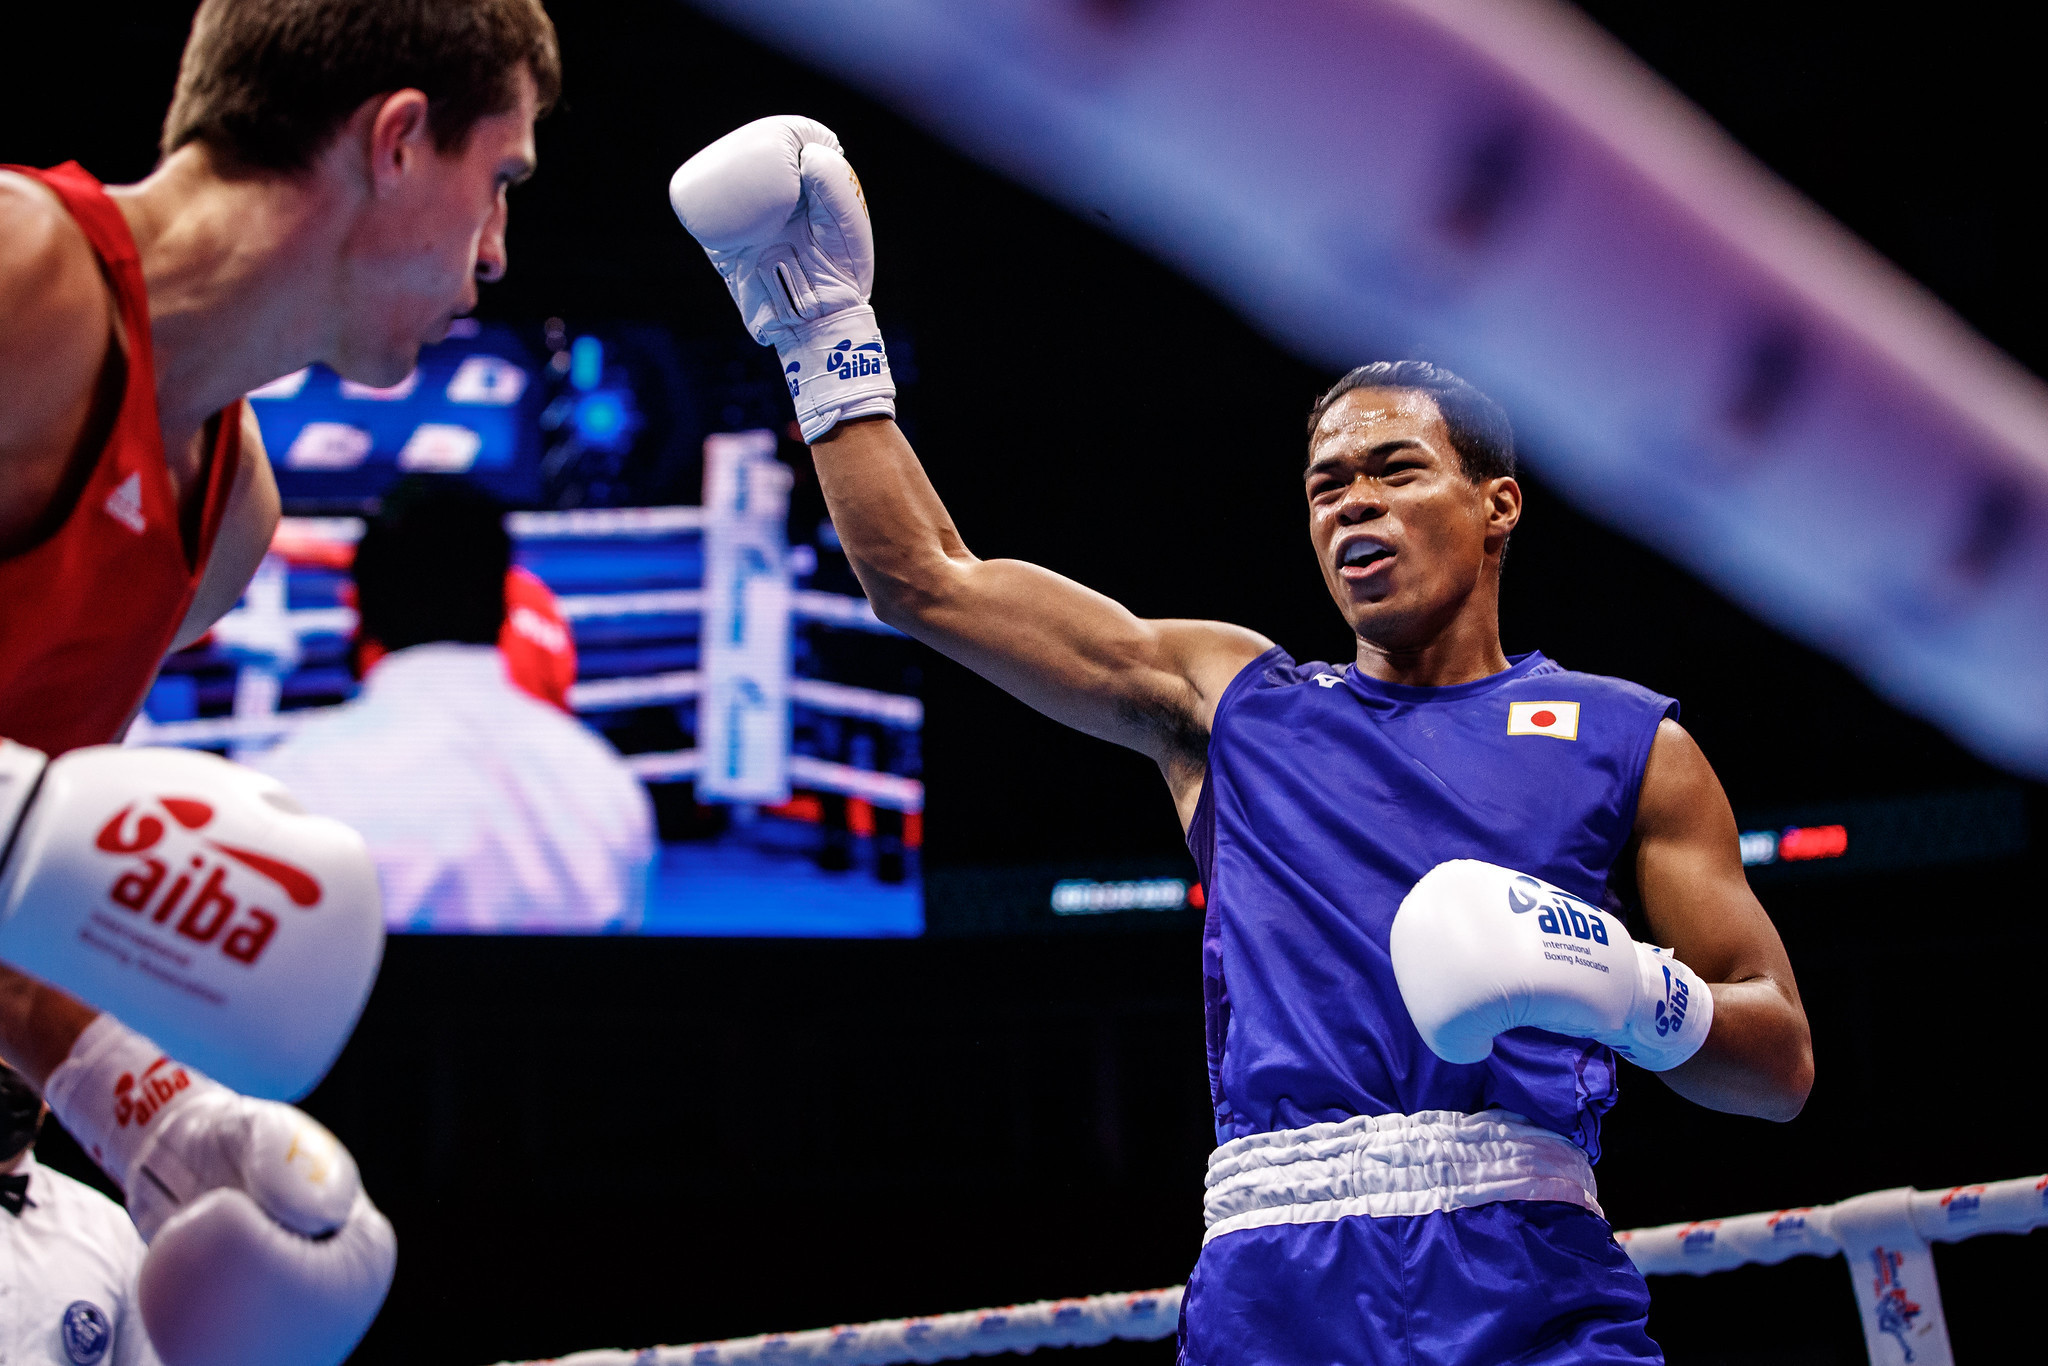 Boxers have been competing in Belgrade for over a week, with the semi-finals taking place today ©AIBA